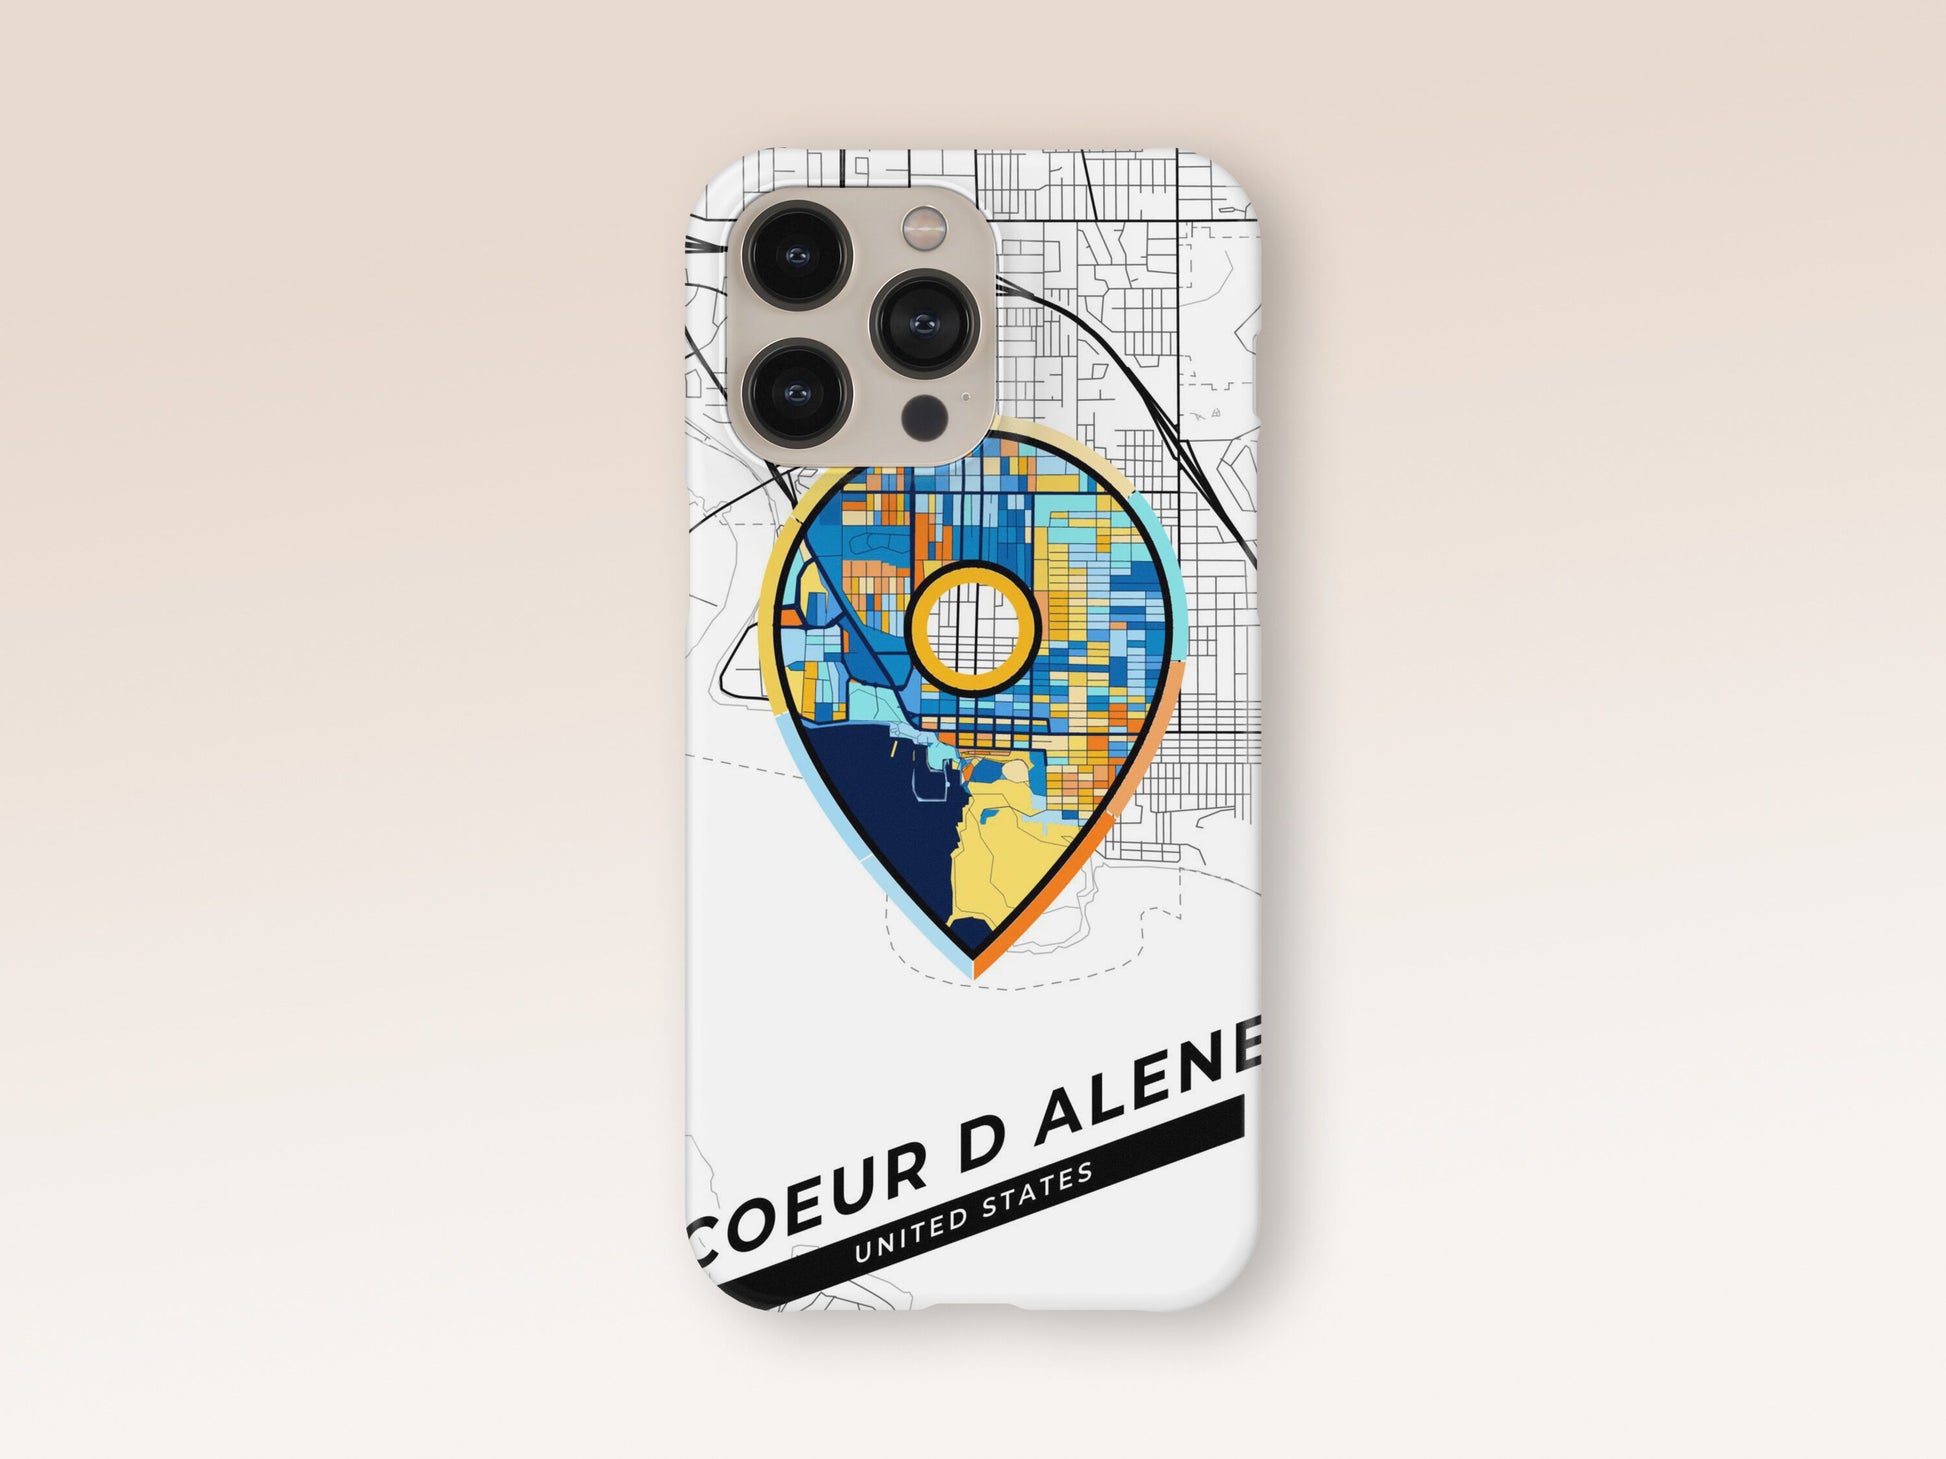 Coeur D Alene Idaho slim phone case with colorful icon. Birthday, wedding or housewarming gift. Couple match cases. 1